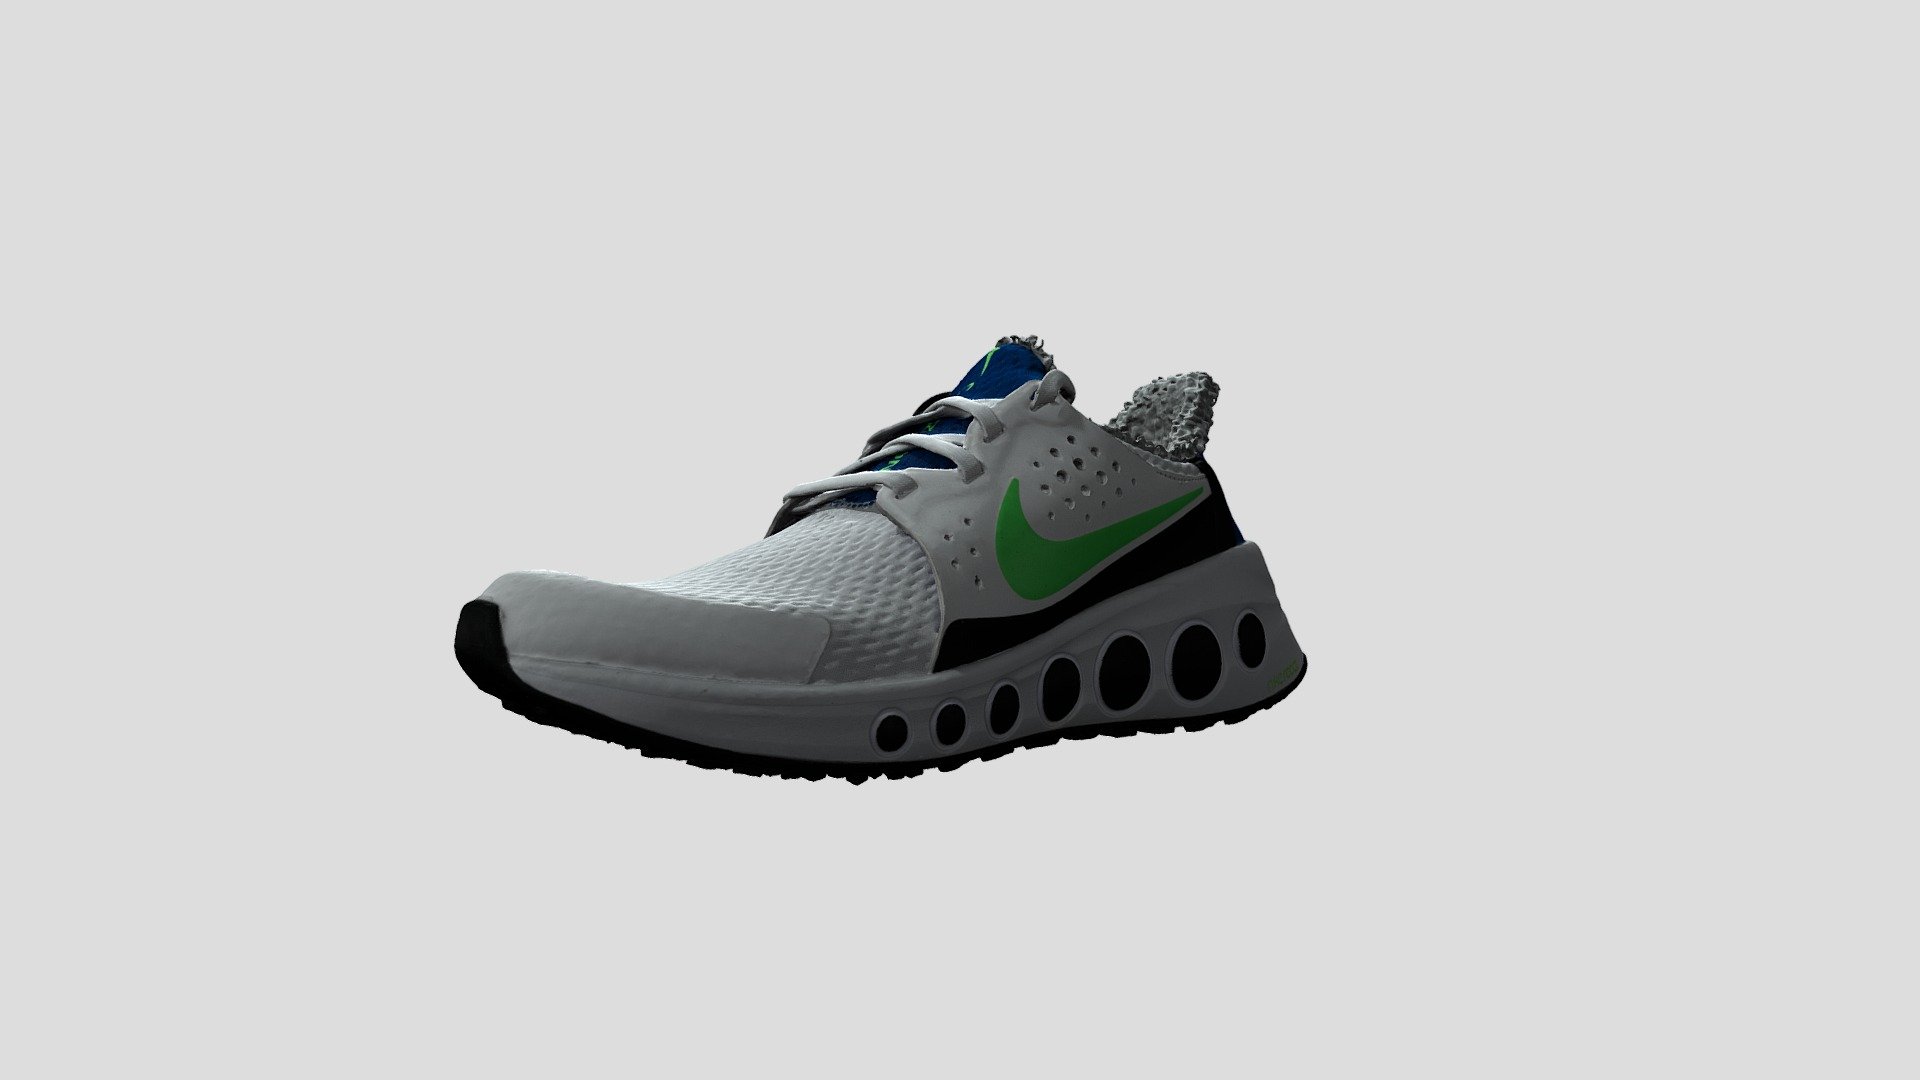 Nike Cruzr One White.
Scanned with photogrammetry 3d model